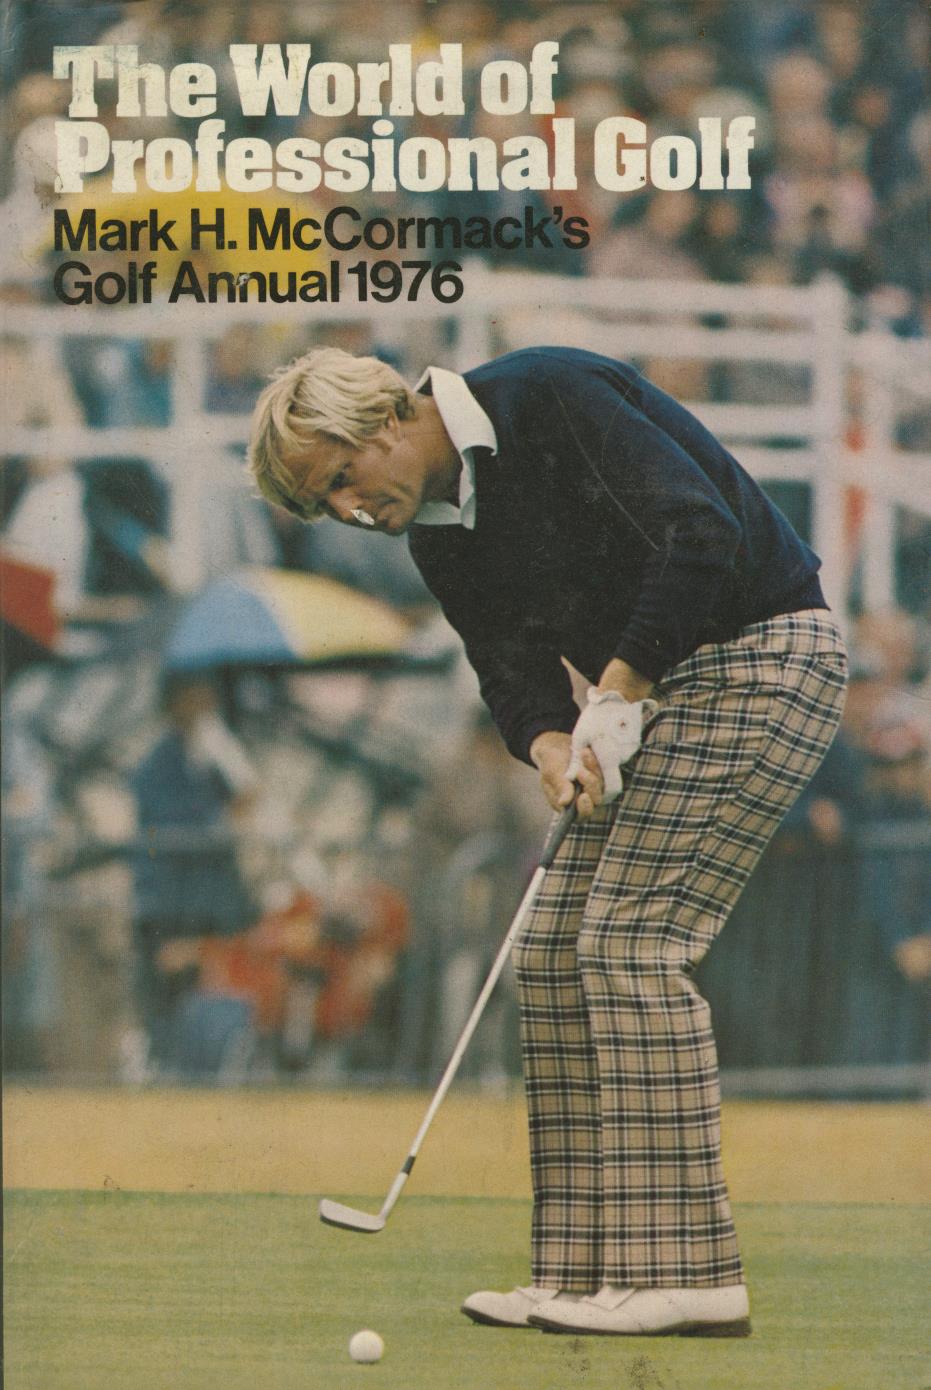 THE WORLD OF PROFESSIONAL GOLF: MARK H. MCCORMACK'S GOLF ANNUAL 1976 ...